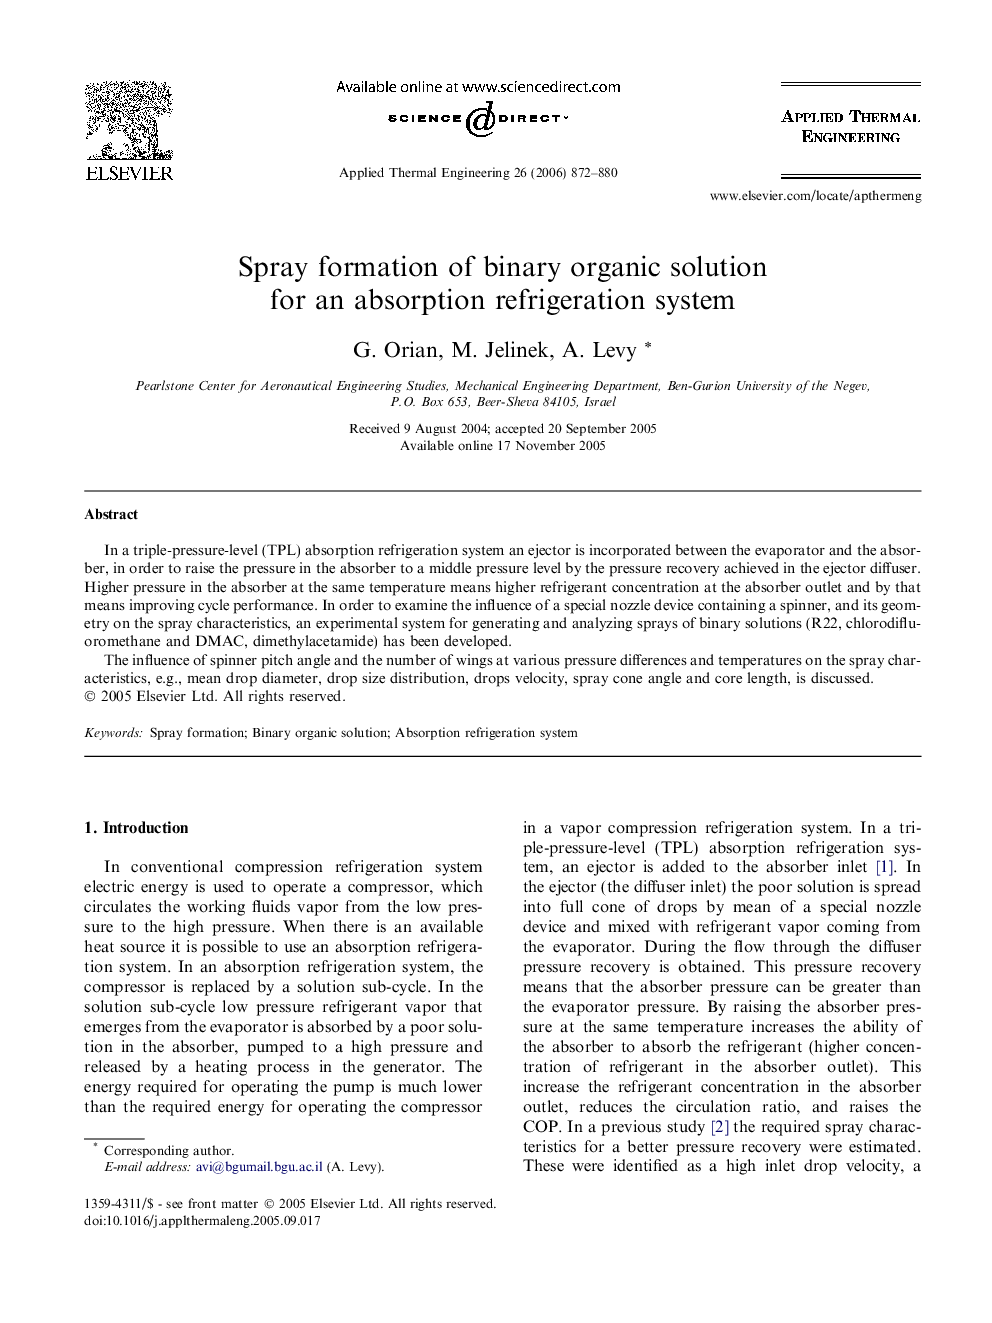 Spray formation of binary organic solution for an absorption refrigeration system